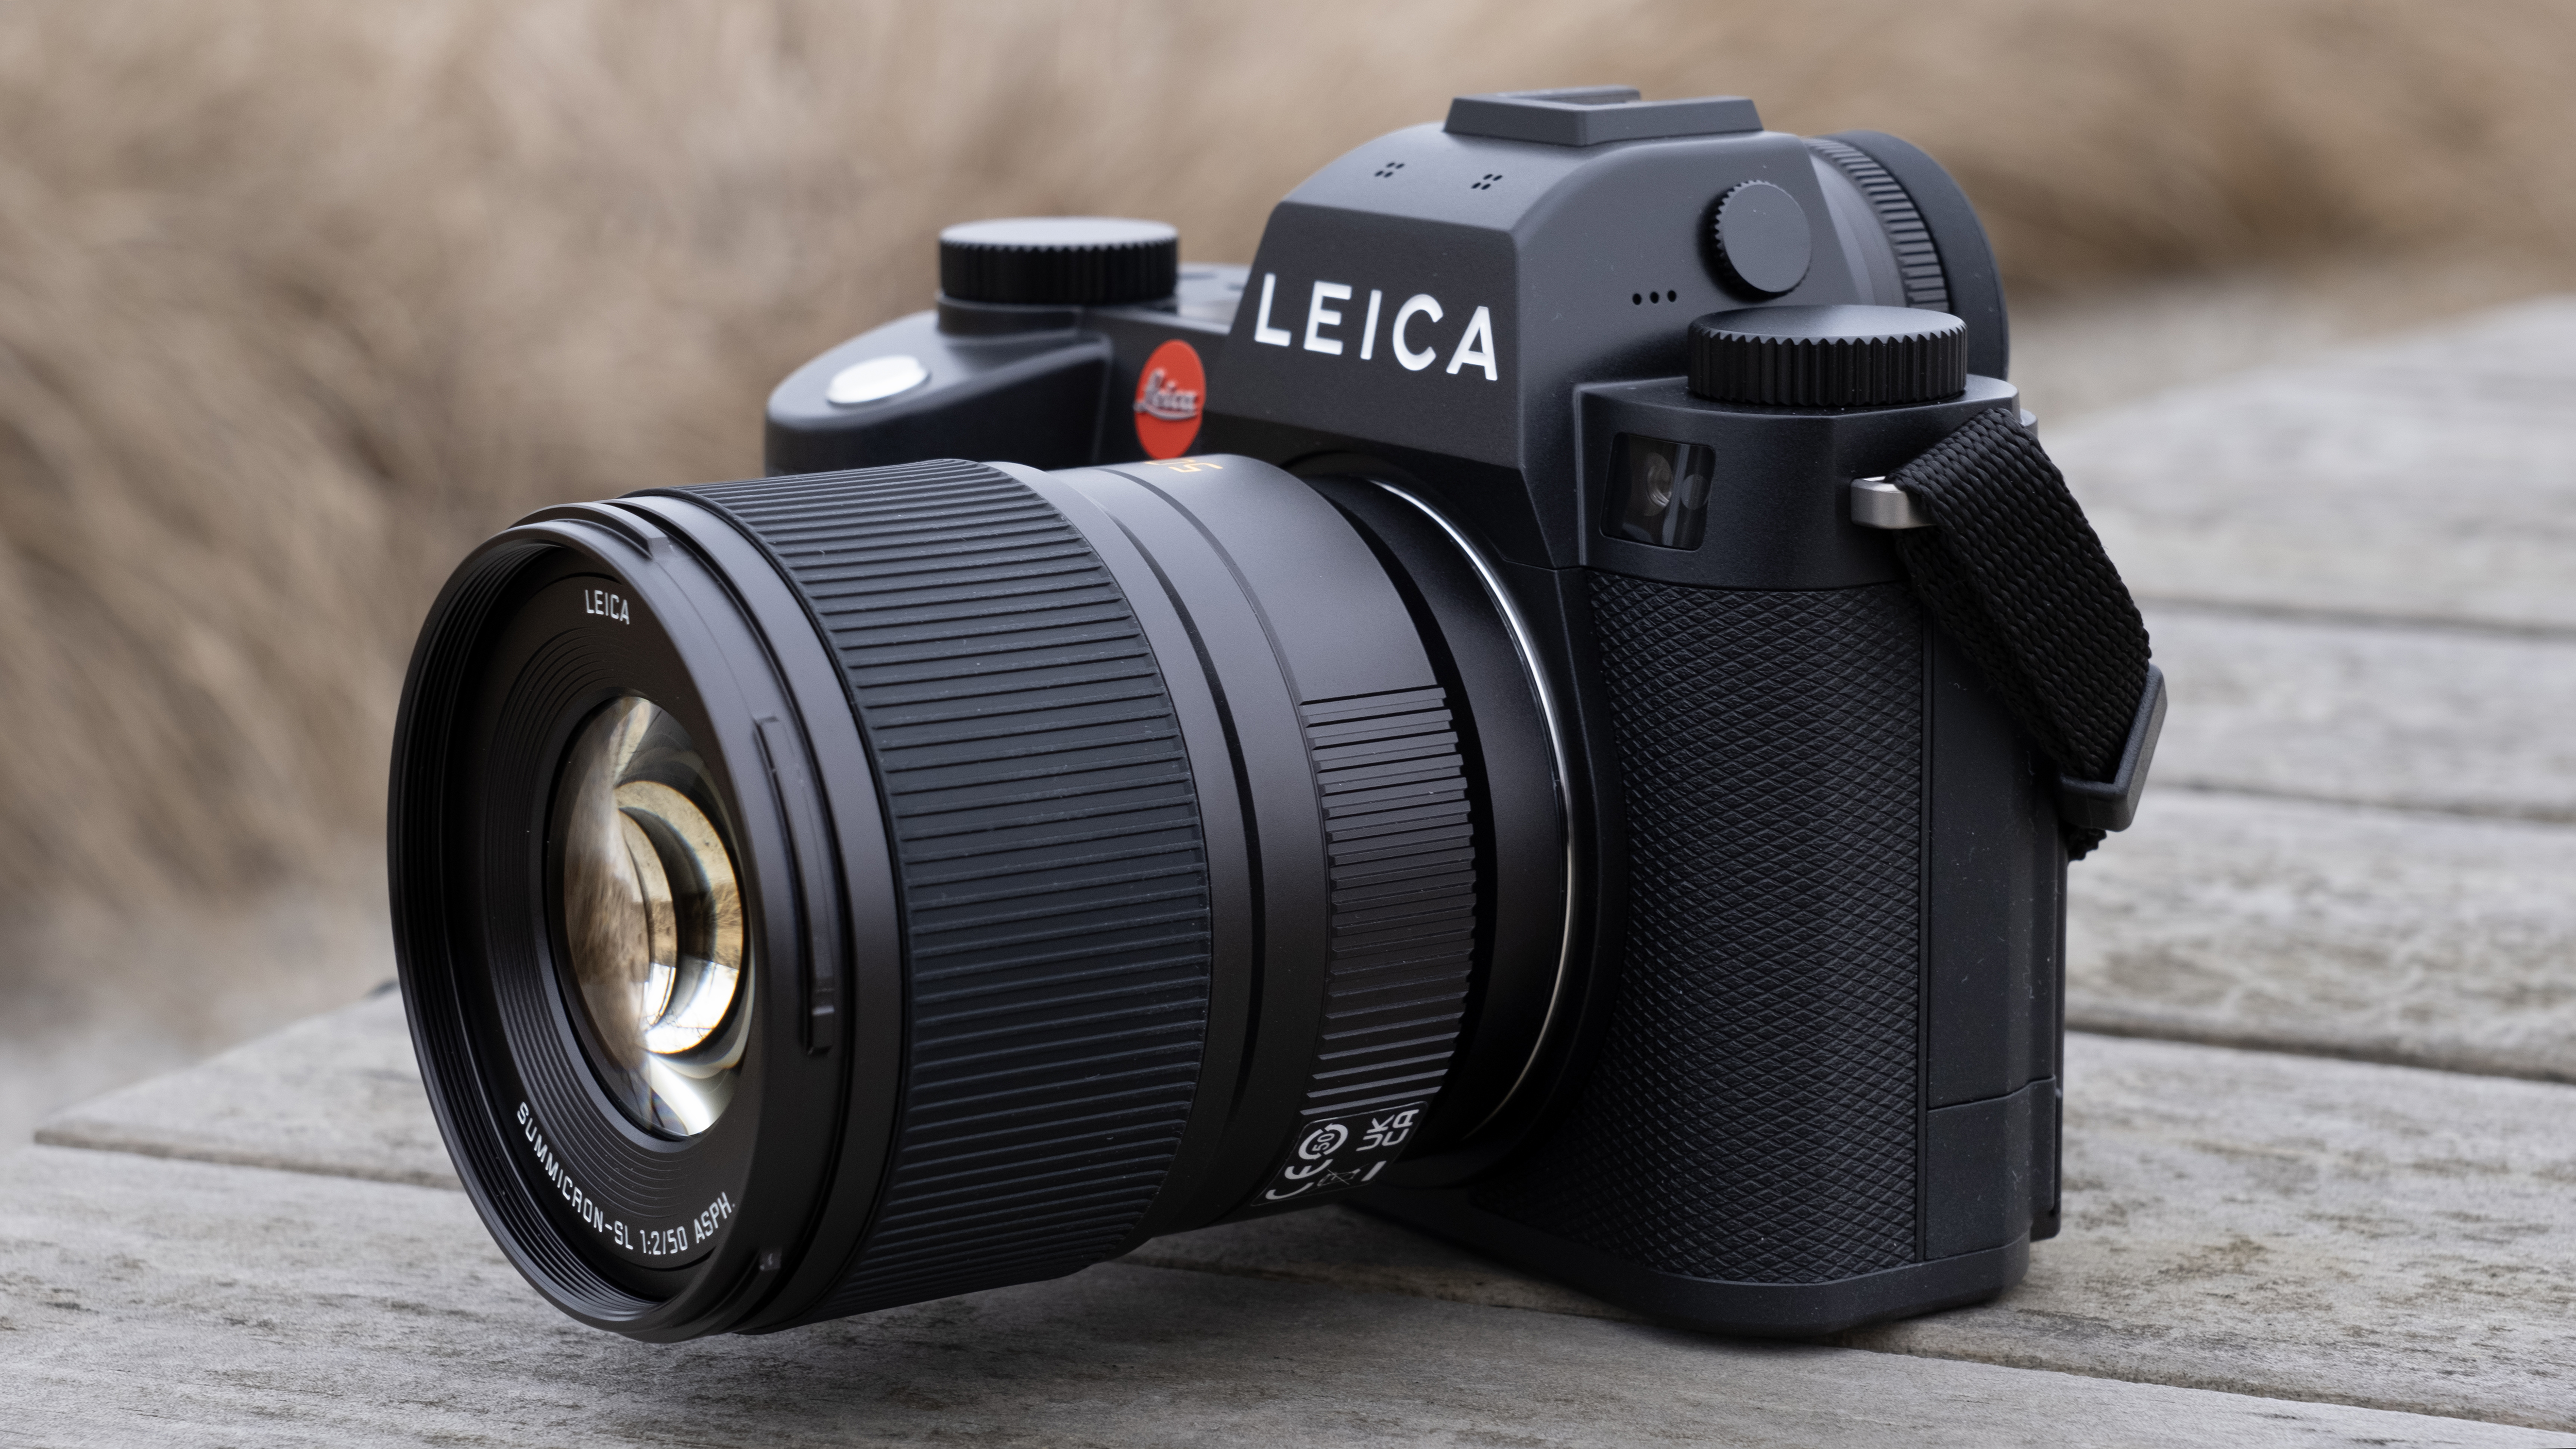 The Leica SL3 sat on a wooden bench